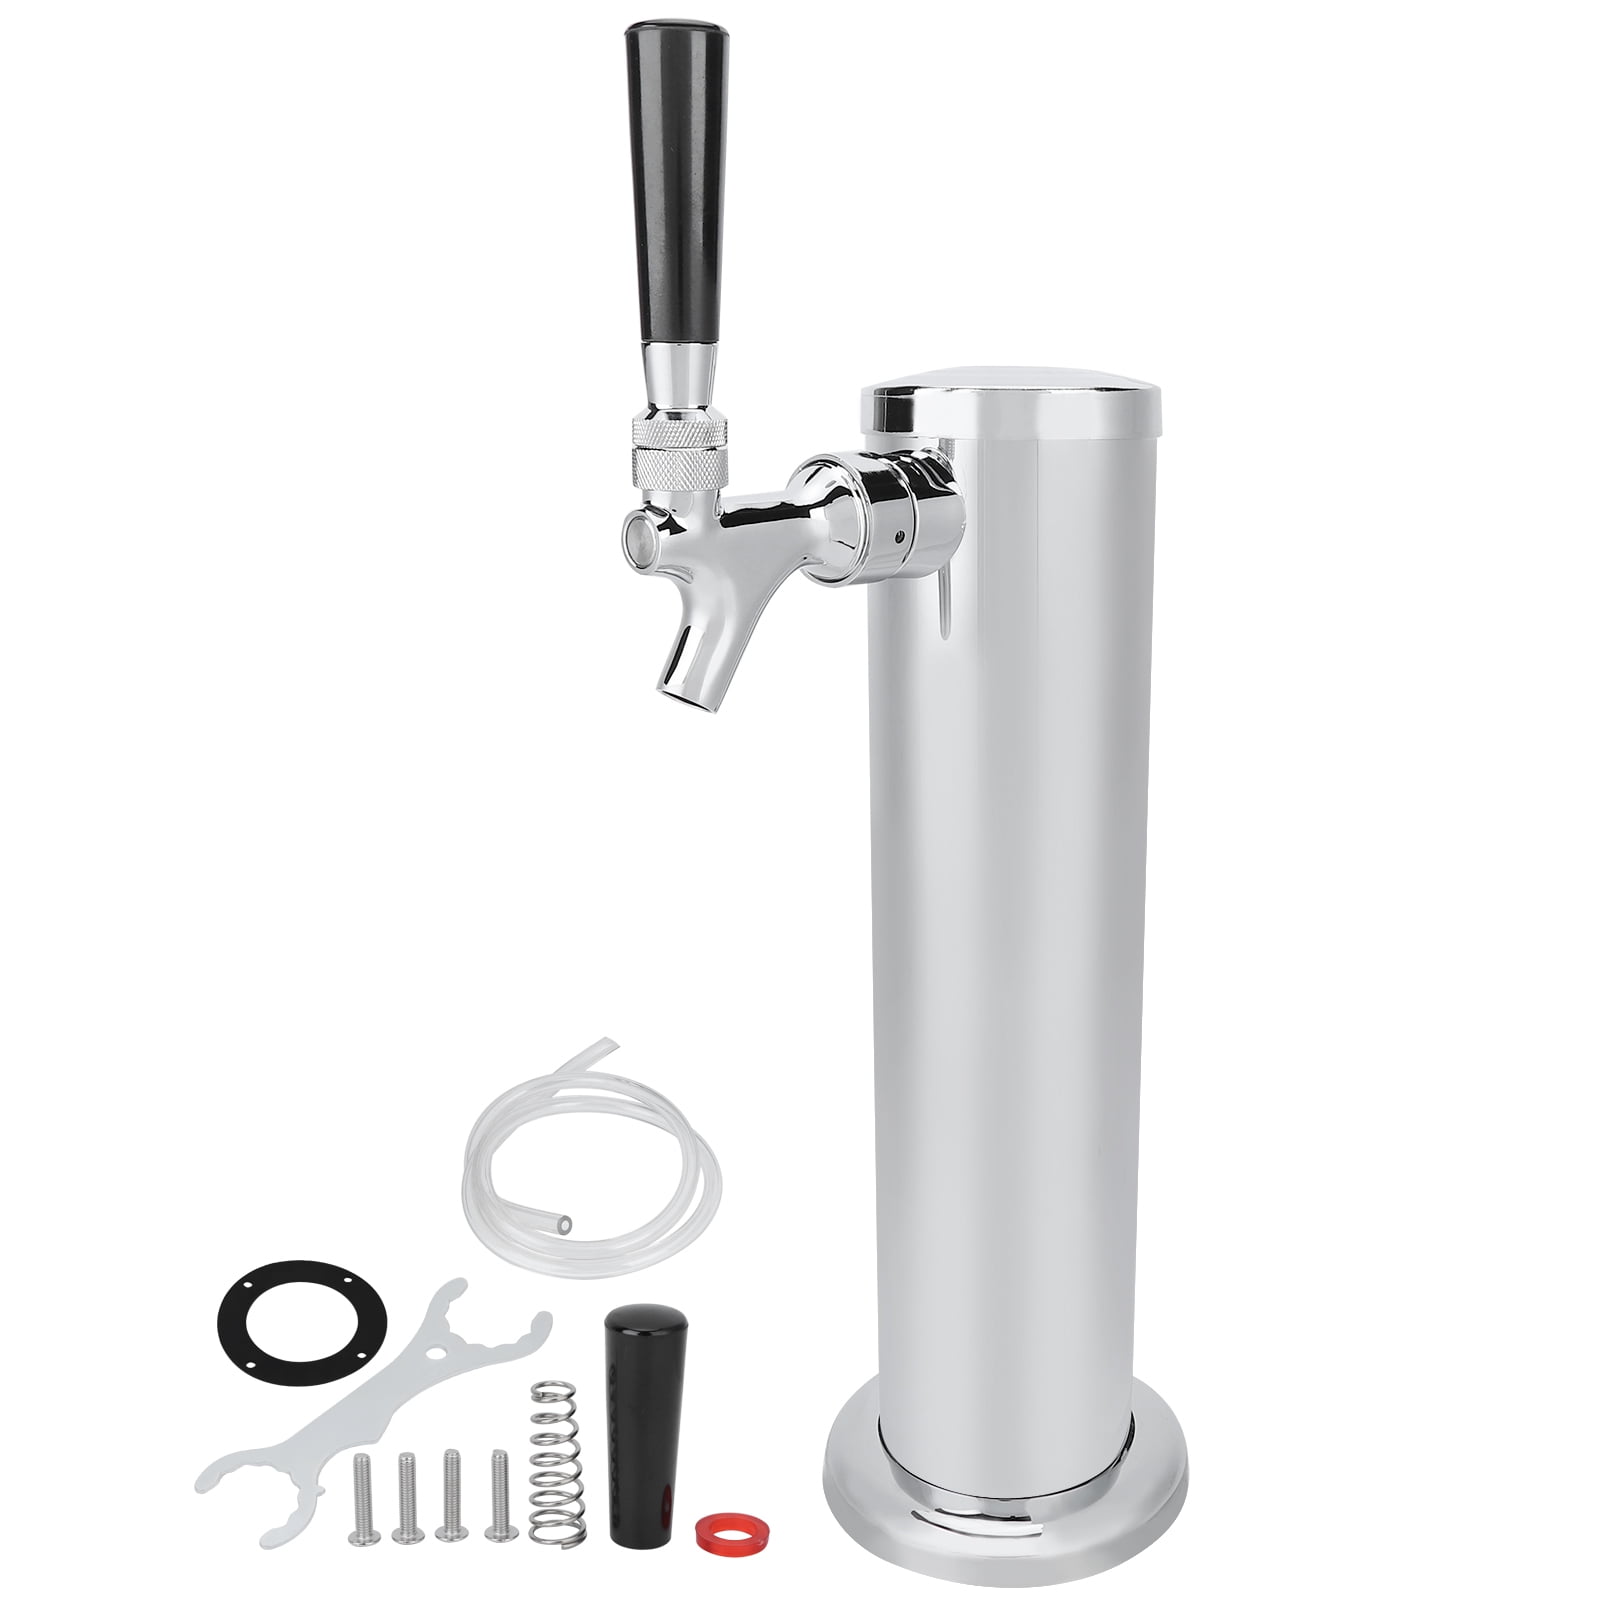 Double Tap Draft Beer Kegerator Tower  2 Faucet Home Bar 100% Stainless Steel 